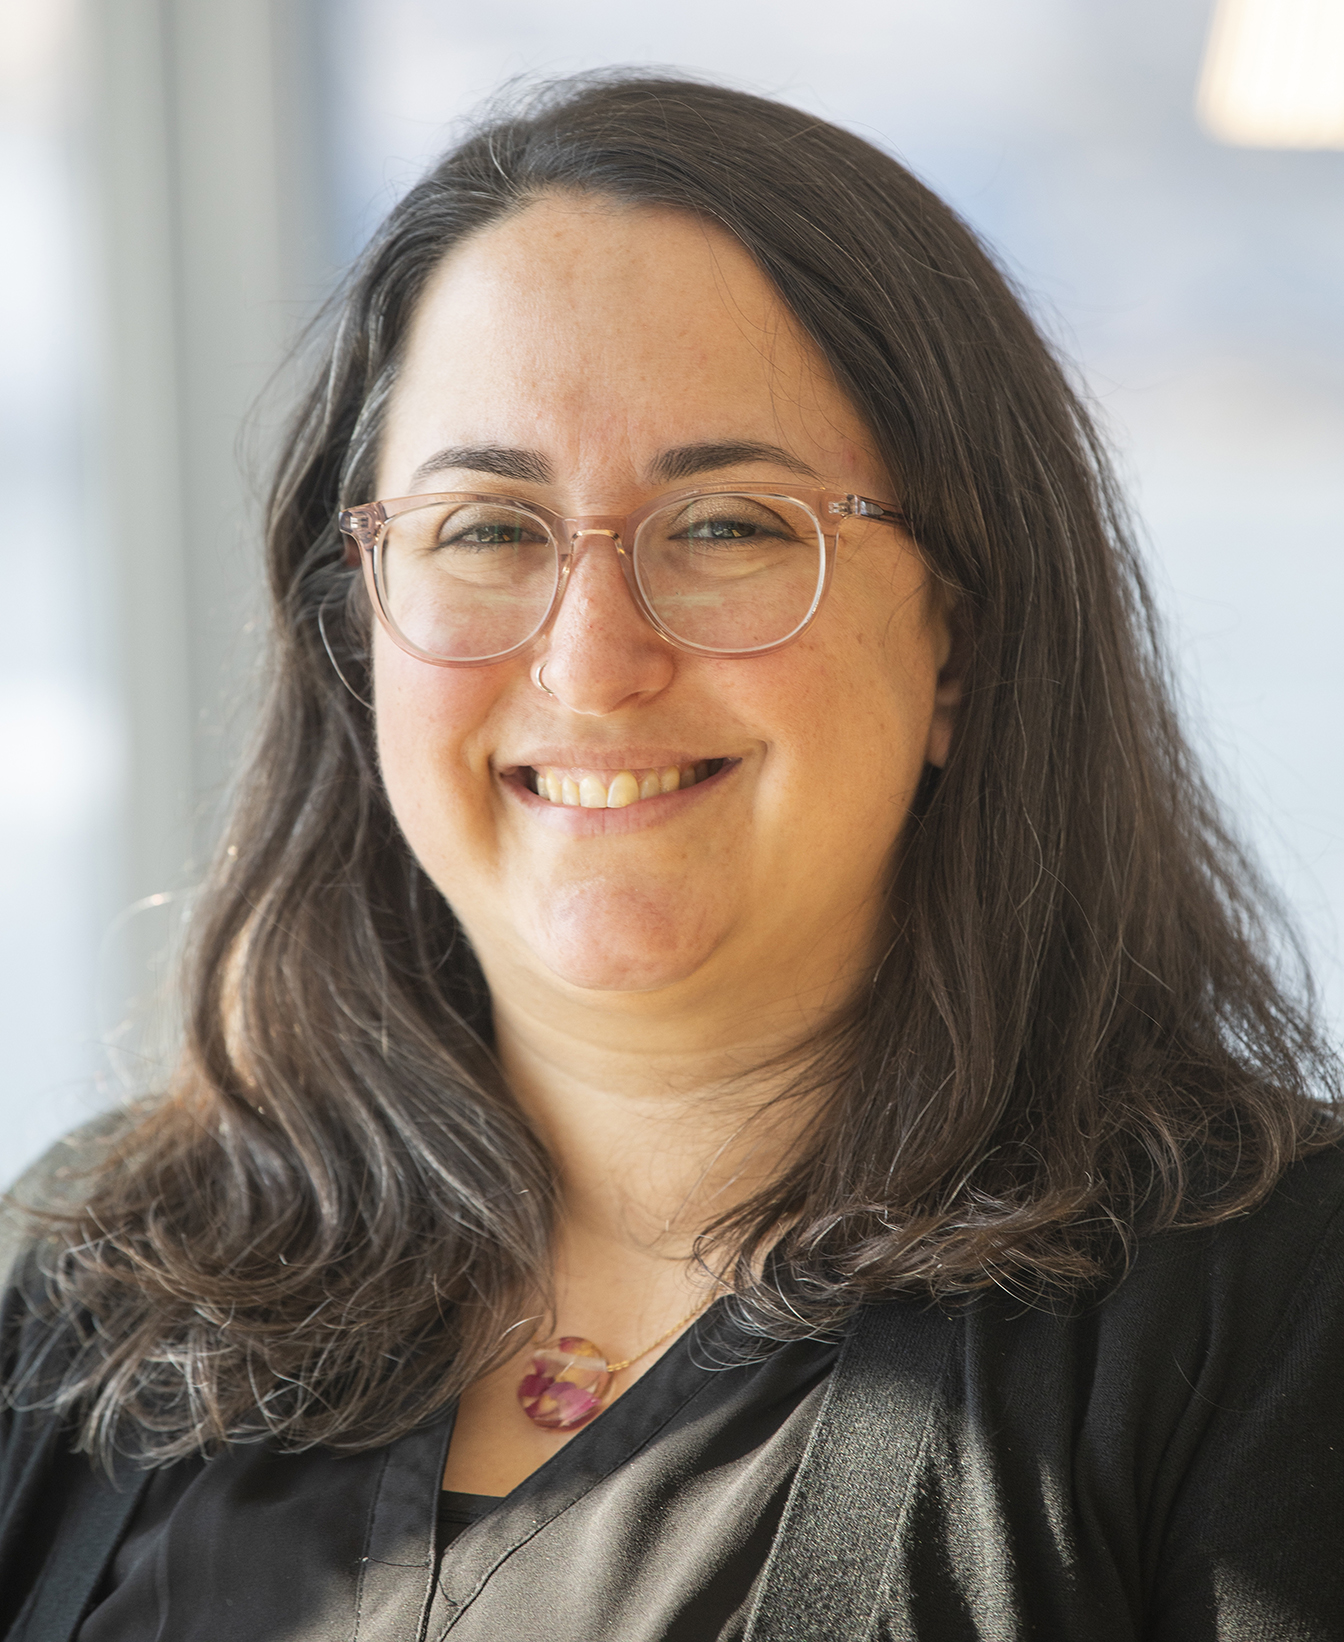 An image of Rabbi Jen Gubitz - a person with shoulder length brown hair and glasses